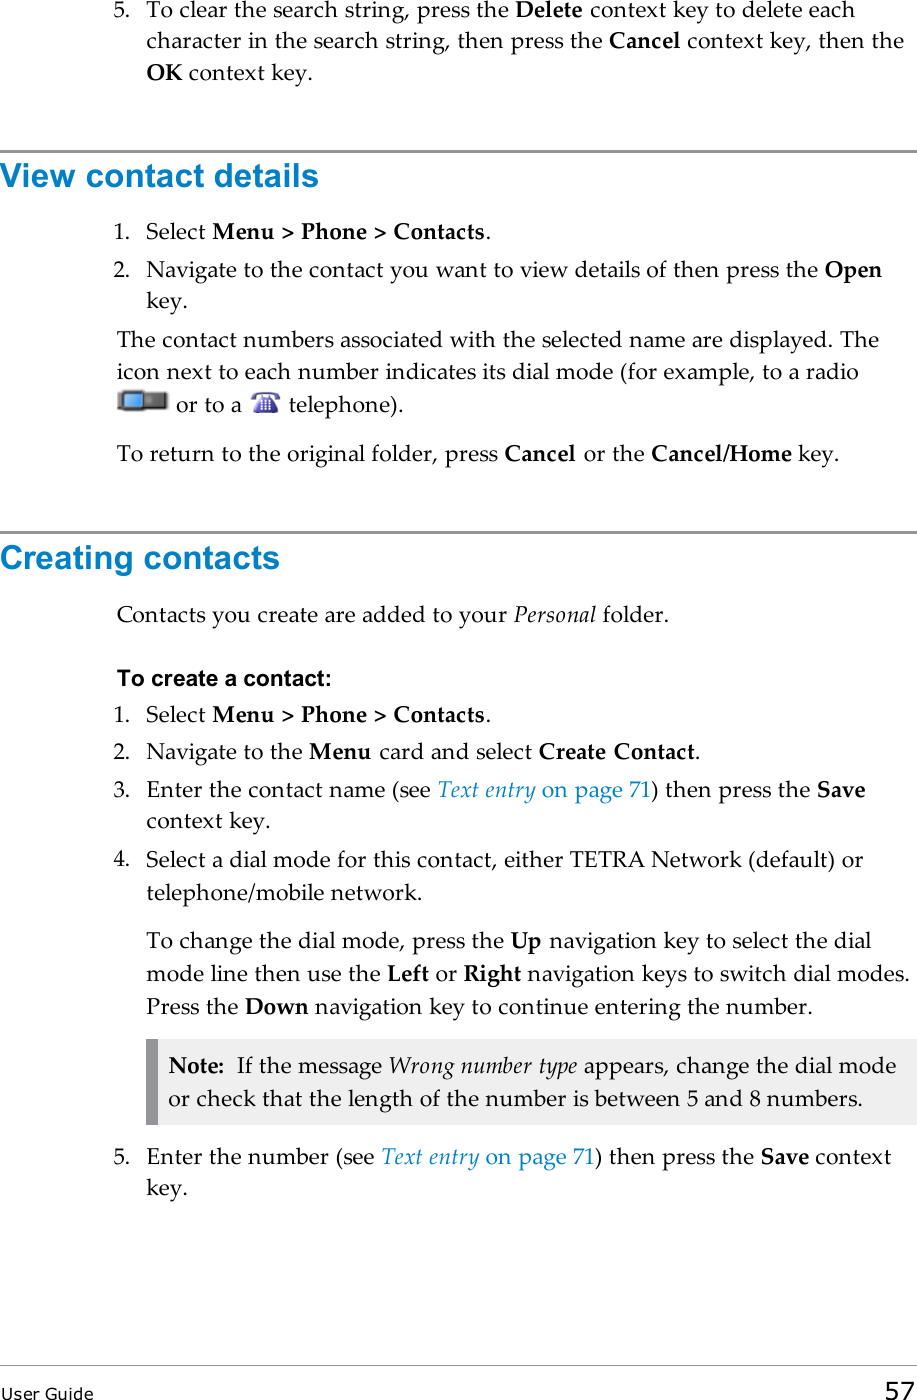 5. To clear the search string, press the Delete context key to delete eachcharacter in the search string, then press the Cancel context key, then theOK context key.View contact details1. Select Menu &gt; Phone &gt; Contacts.2. Navigate to the contact you want to view details of then press the Openkey.The contact numbers associated with the selected name are displayed. Theicon next to each number indicates its dial mode (for example, to a radioor to a telephone).To return to the original folder, press Cancel or the Cancel/Home key.Creating contactsContacts you create are added to your Personal folder.To create a contact:1. Select Menu &gt; Phone &gt; Contacts.2. Navigate to the Menu card and select Create Contact.3. Enter the contact name (see Text entry on page 71) then press the Savecontext key.4. Select a dial mode for this contact, either TETRA Network (default) ortelephone/mobile network.To change the dial mode, press the Up navigation key to select the dialmode line then use the Left or Right navigation keys to switch dial modes.Press the Down navigation key to continue entering the number.Note: If the message Wrong number type appears, change the dial modeor check that the length of the number is between 5 and 8 numbers.5. Enter the number (see Text entry on page 71) then press the Save contextkey.User Guide 57